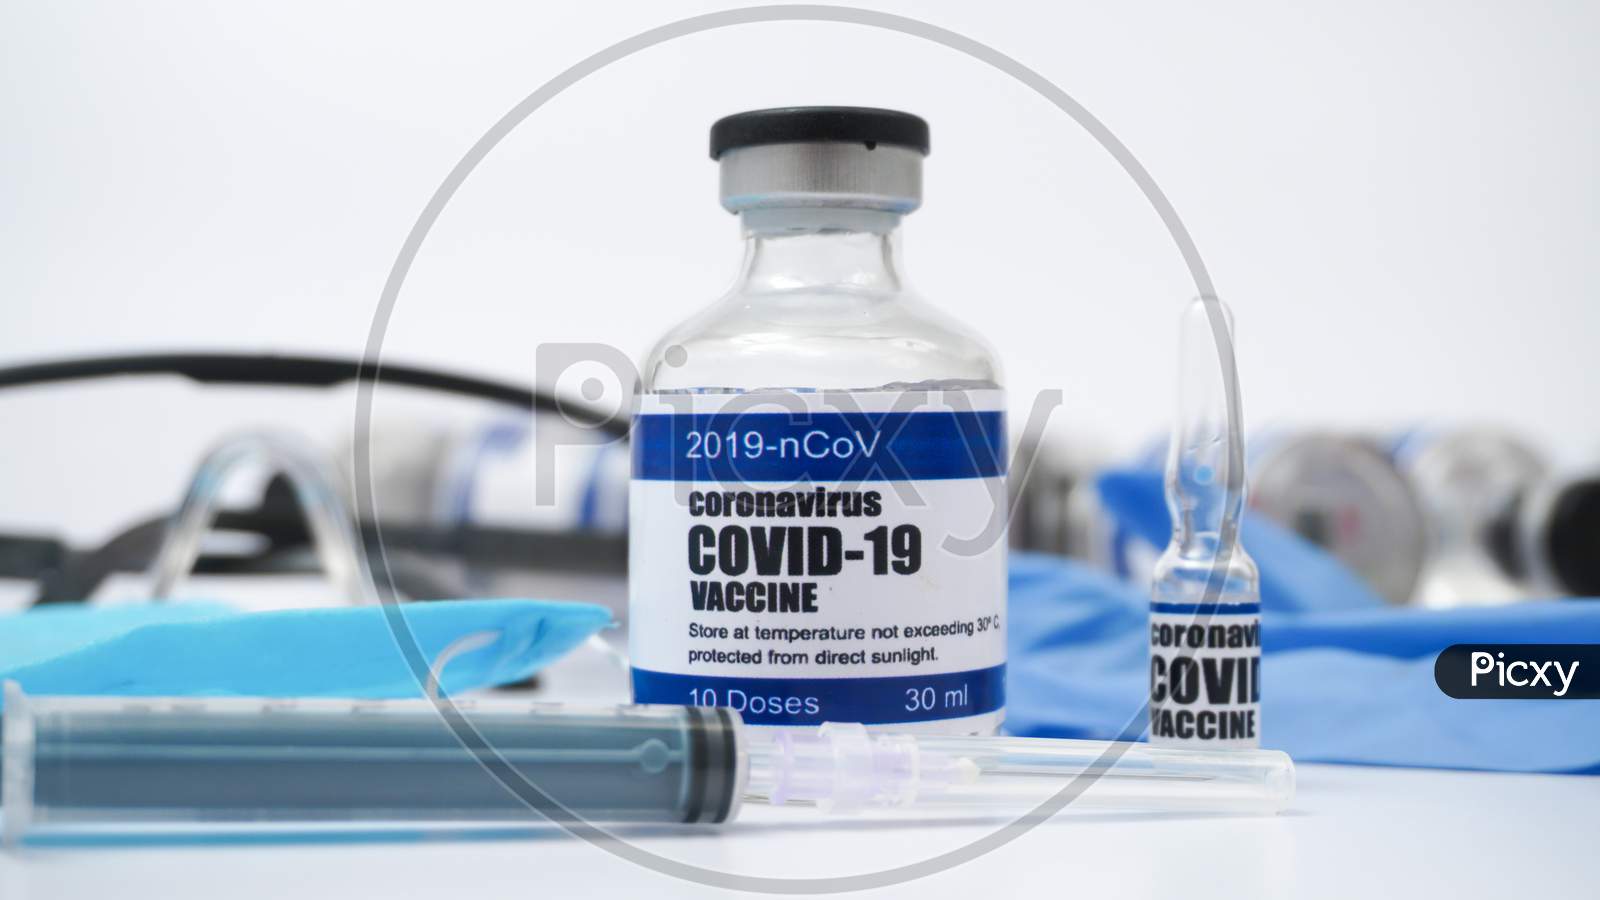 Covid-19 Corona Virus 2019-Ncov Vaccine Vials Medicine Drug Ampoule Bottle Syringe Injection Medical Nitrile Gloves Mask Glasses. Vaccination, Treatment To Cure Covid 19 Corona Virus Infection.